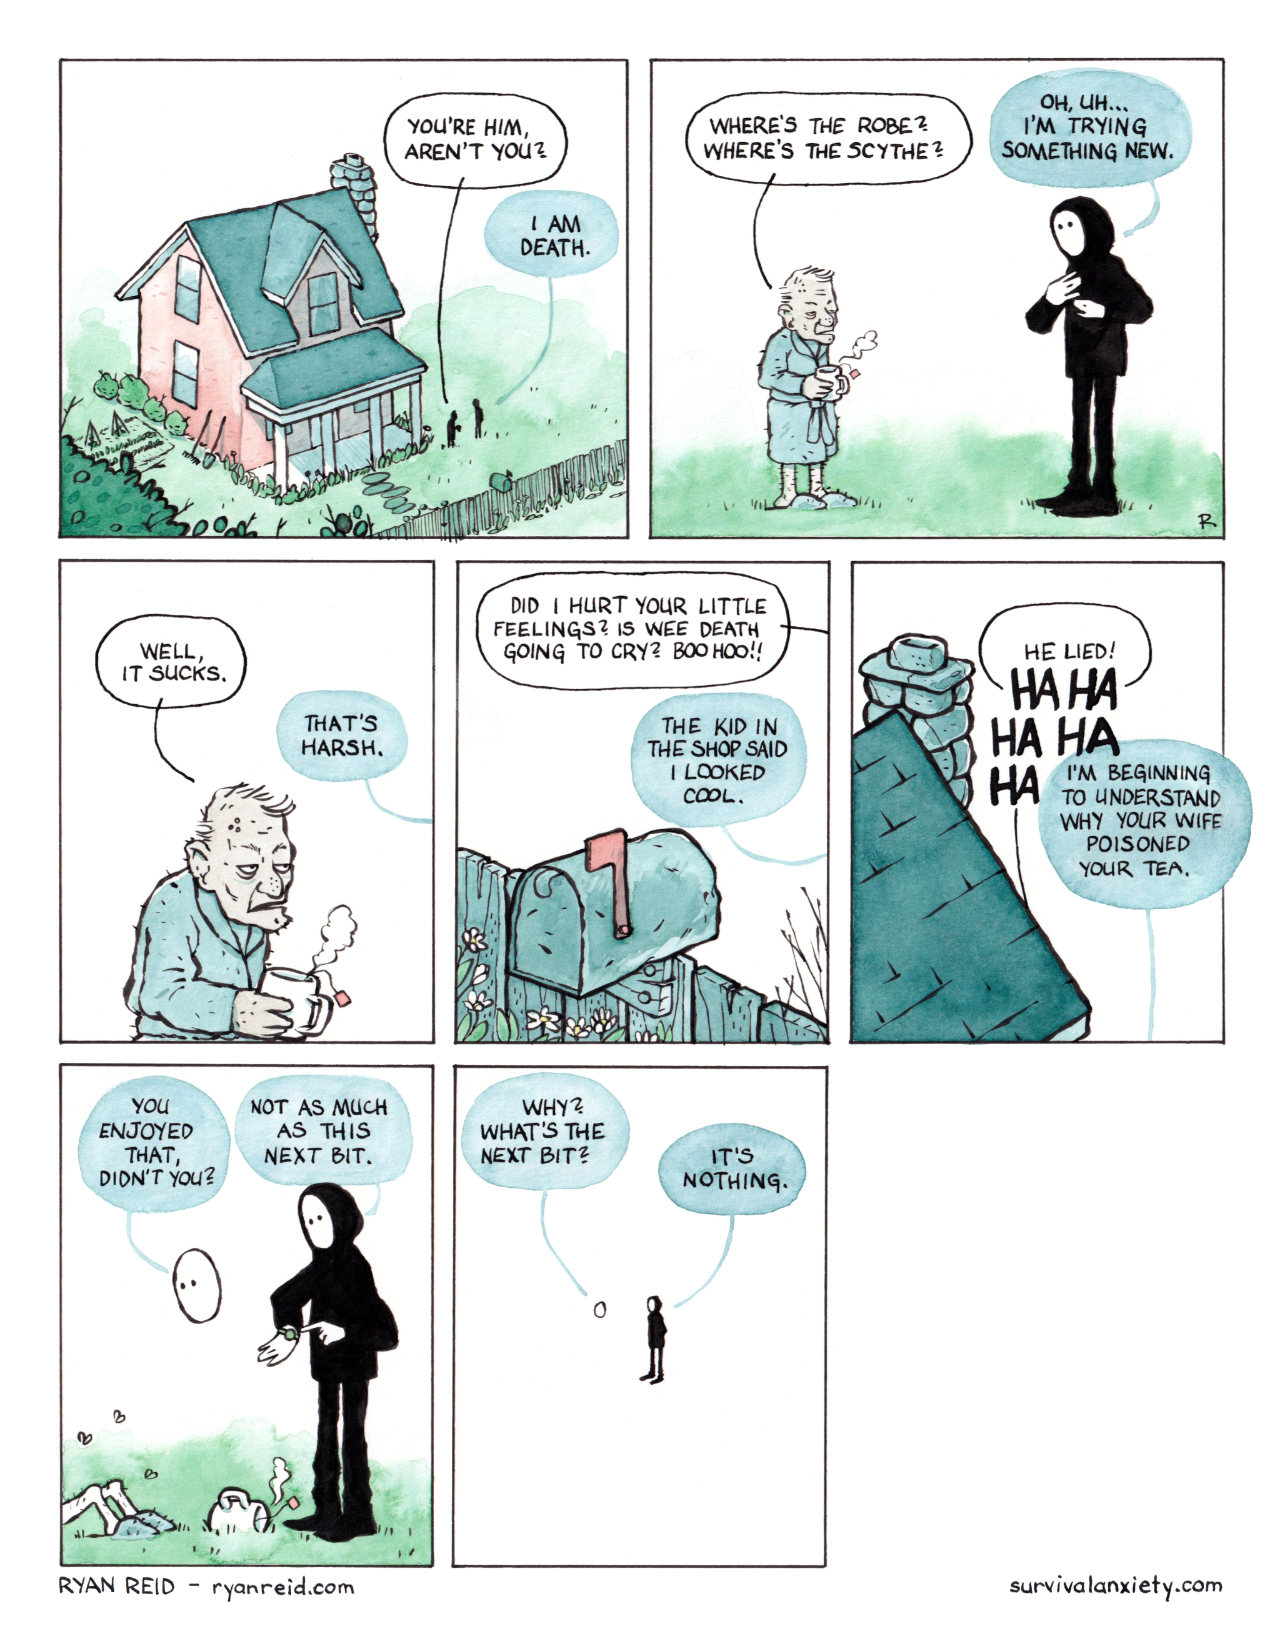 In this comic, Death gets some new clothes, and meets an old man who is a critic right to his last breath.